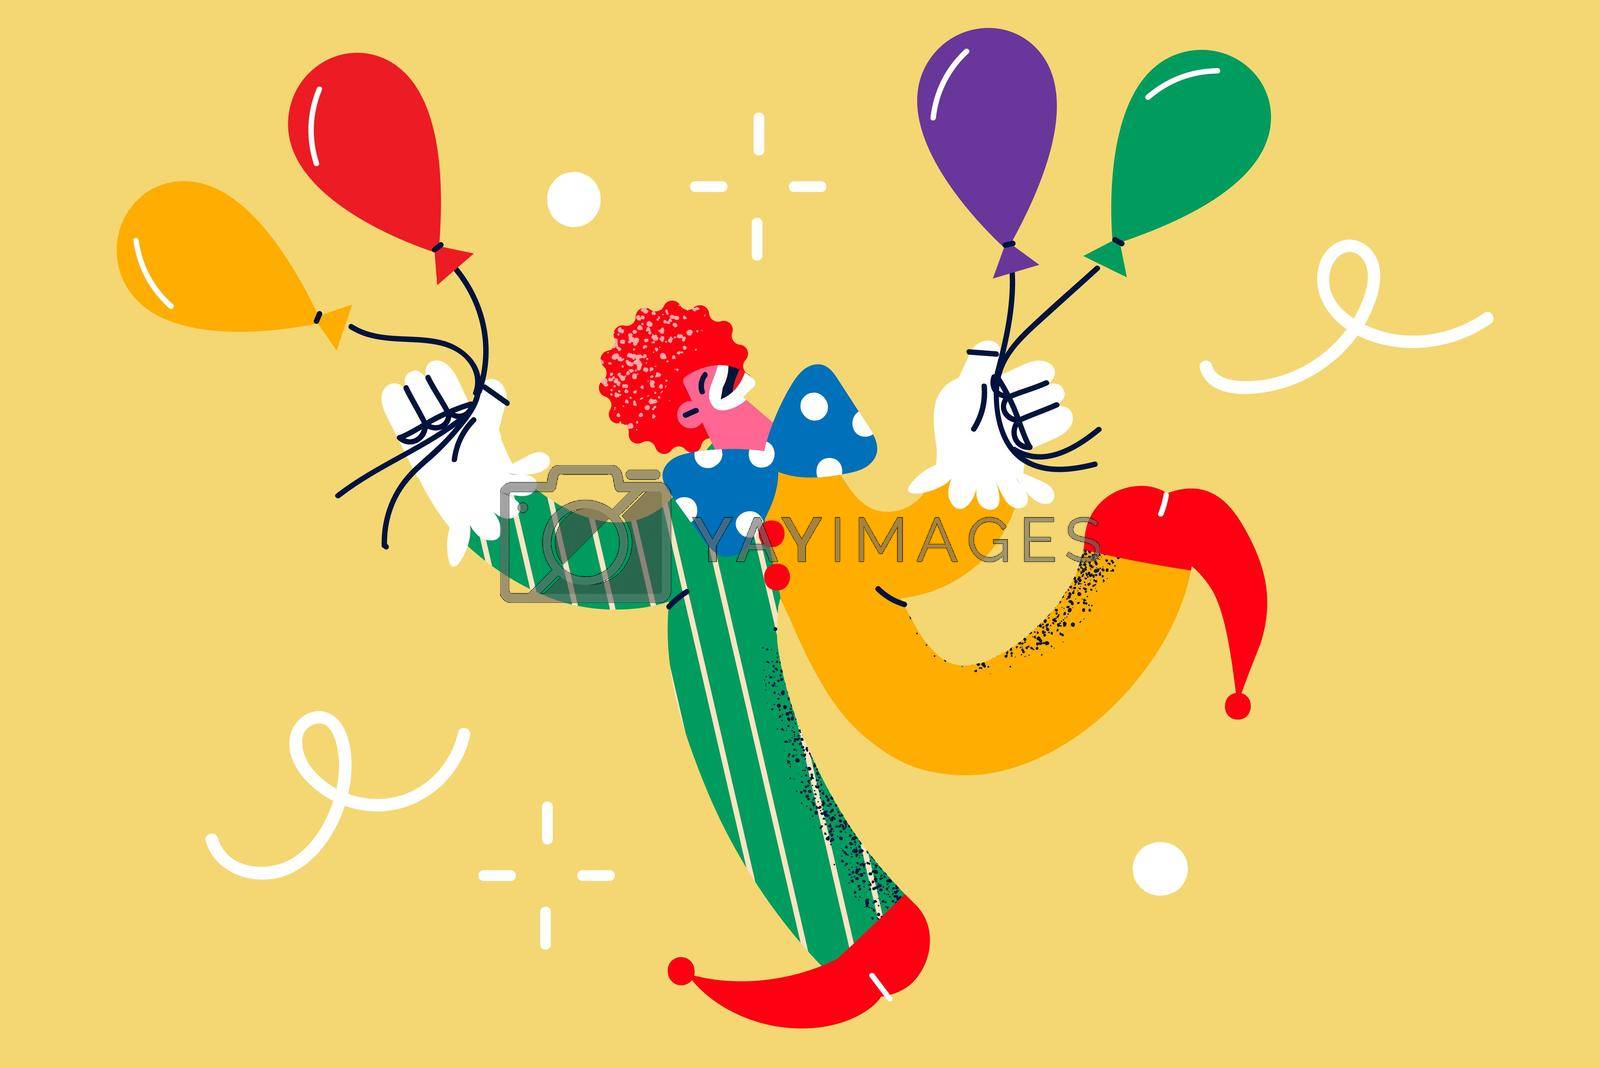 Overjoyed clown hold balloons have fun congratulate greet people on party. Smiling comic person amusement entertainment in circus. Comedian cartoon character. Flat vector illustration.